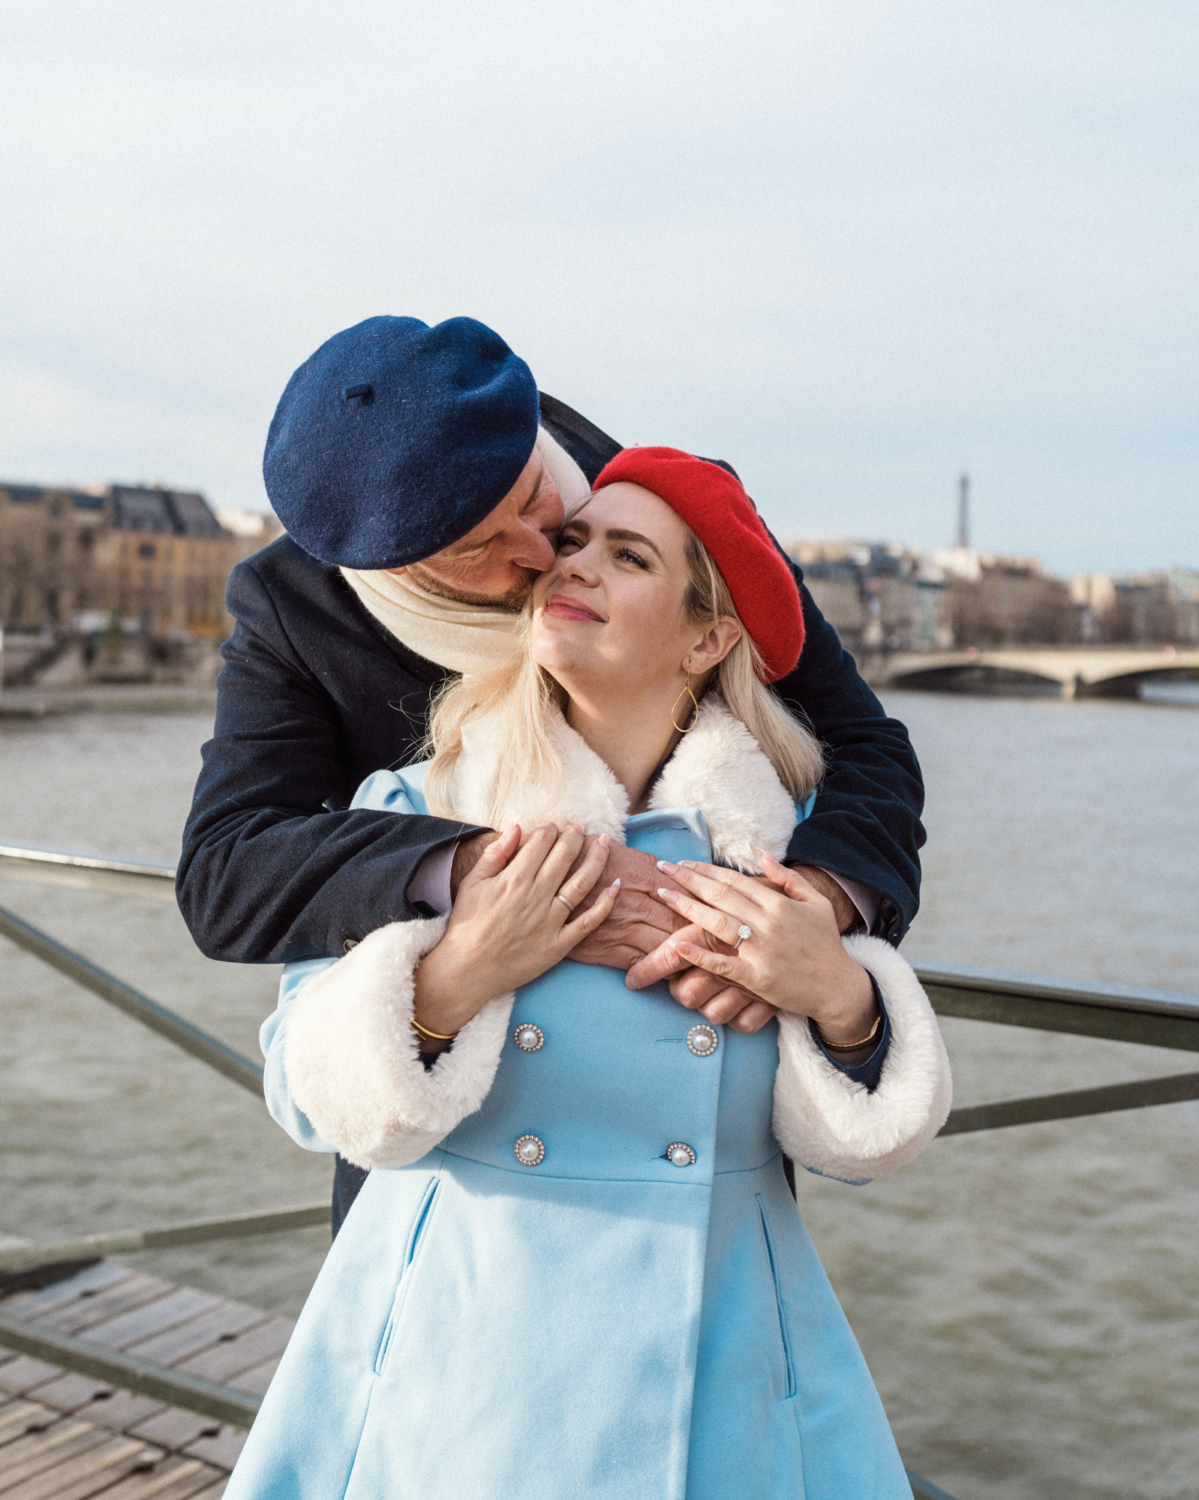 man wearing beret kisses woman wearing beret on side of face in paris